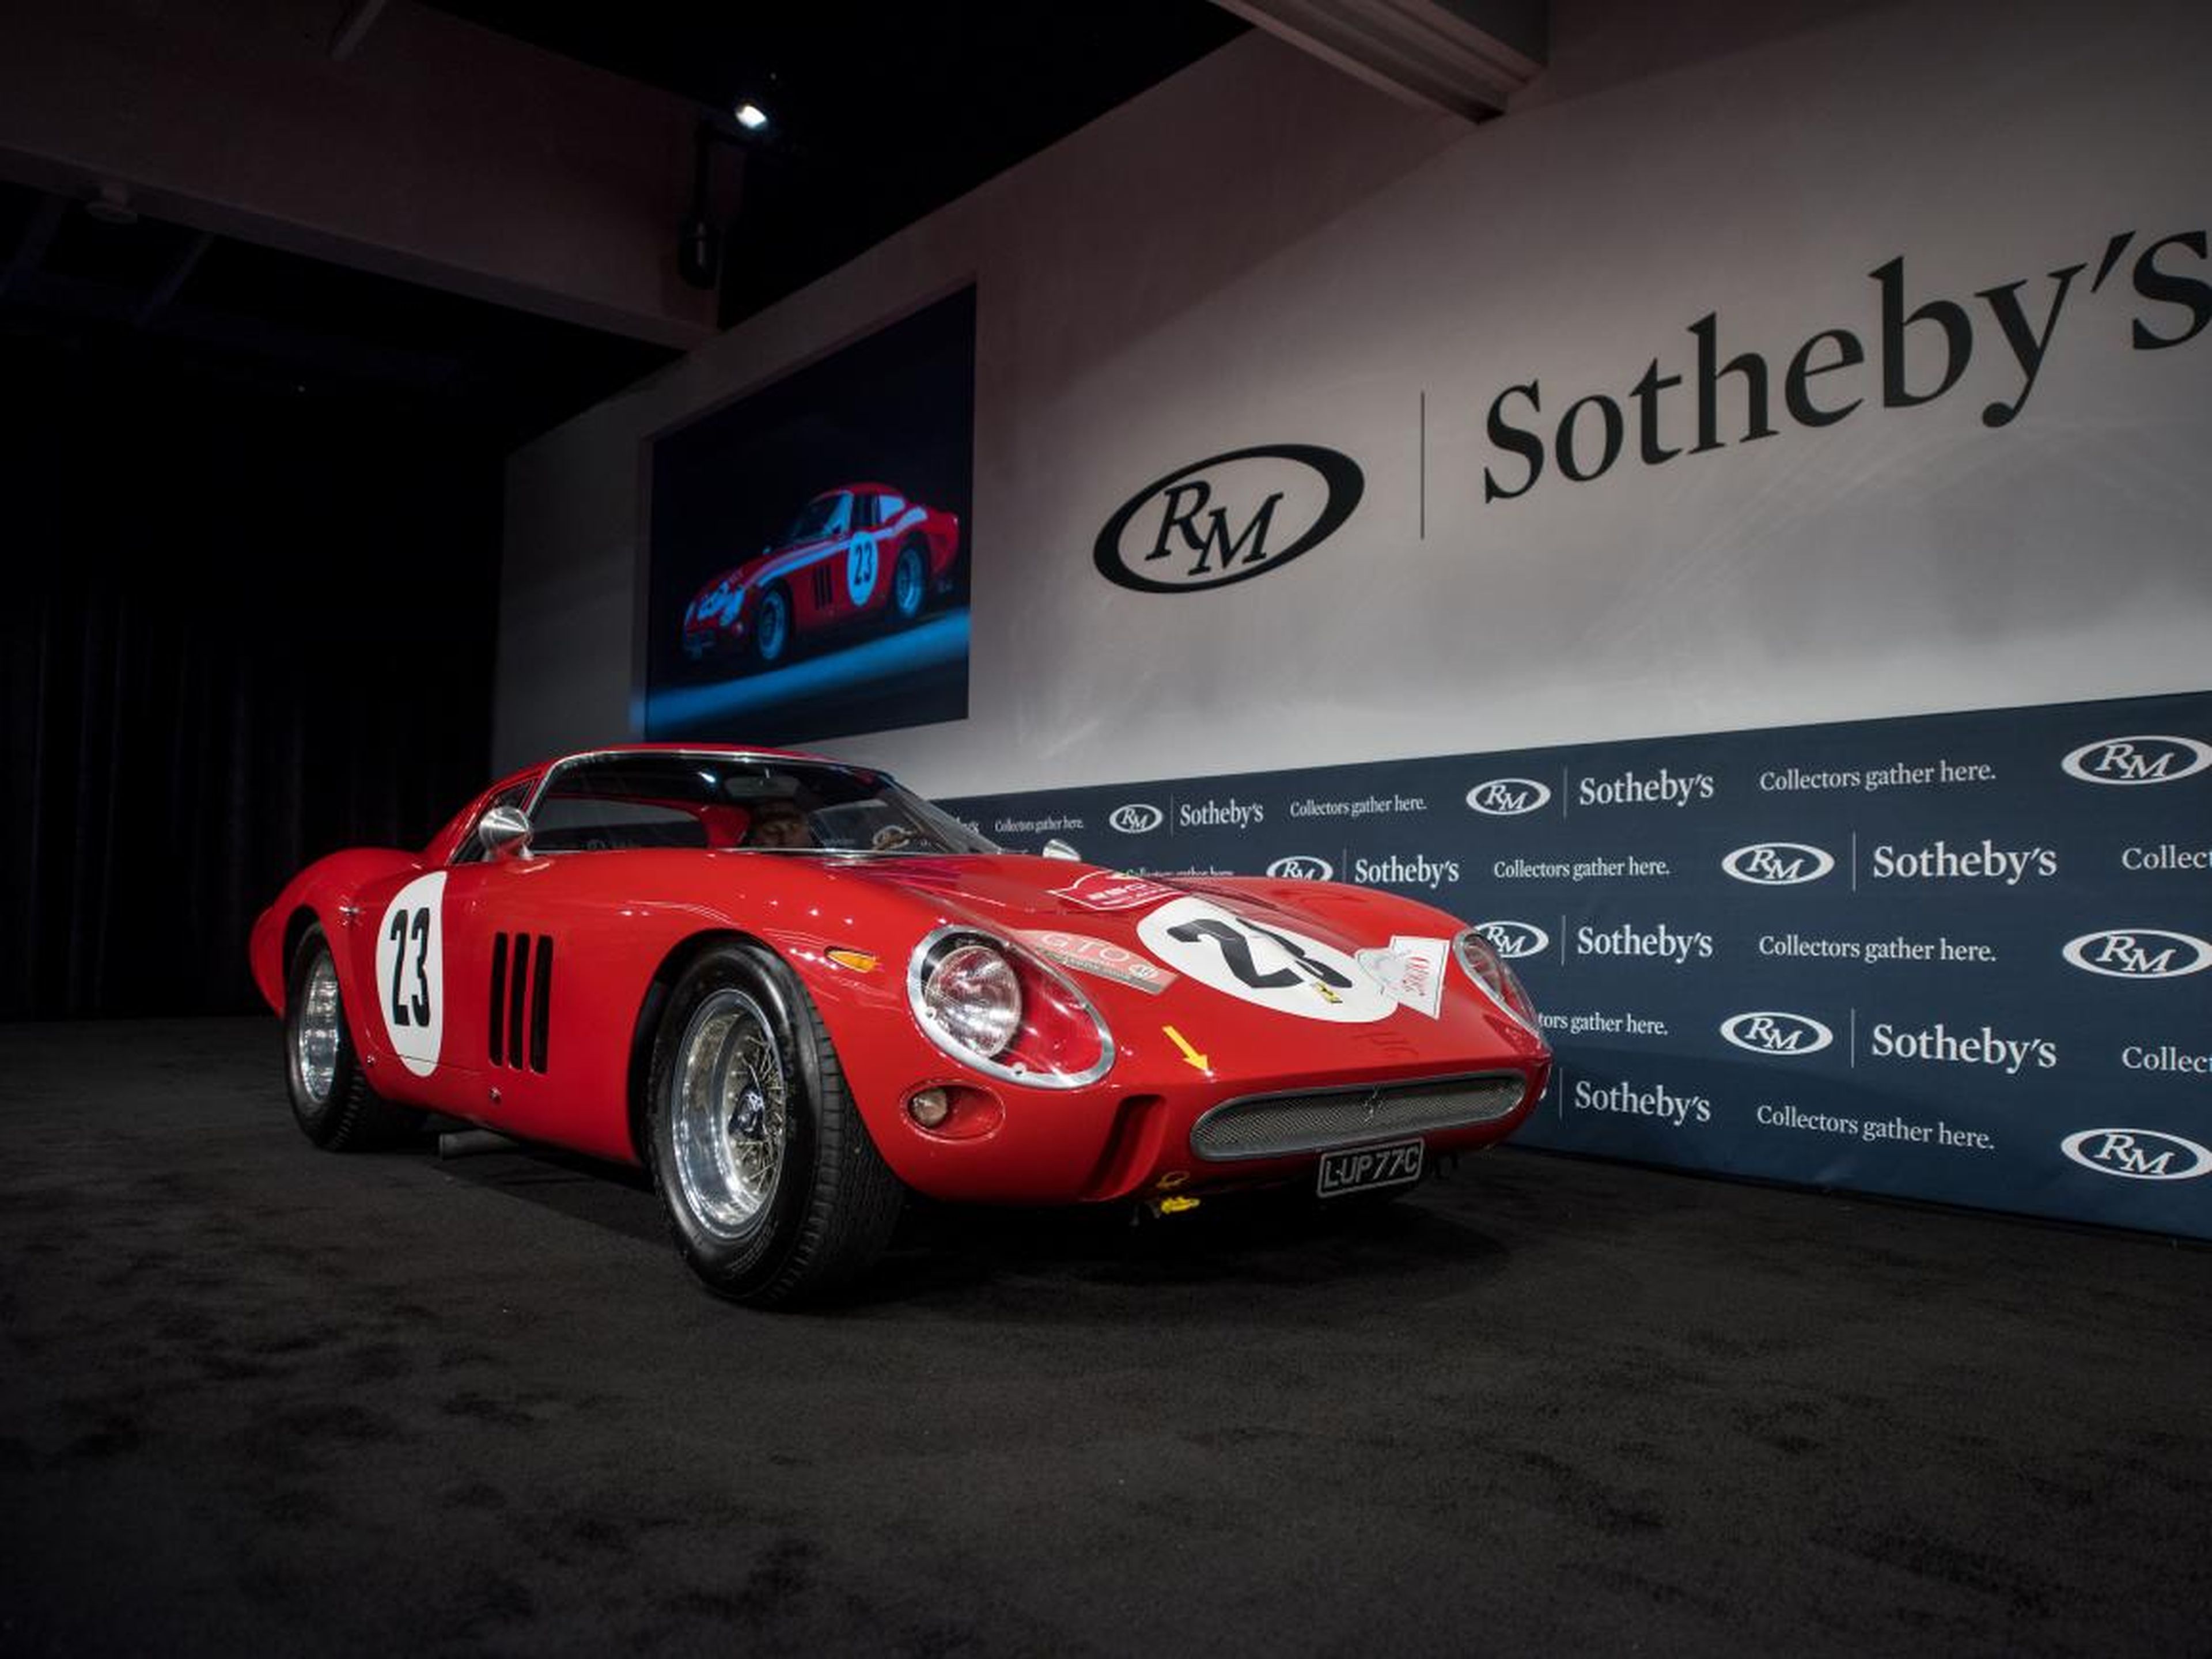 The 1962 Ferrari 250 GTO that sold for $48.4 million at an auction.